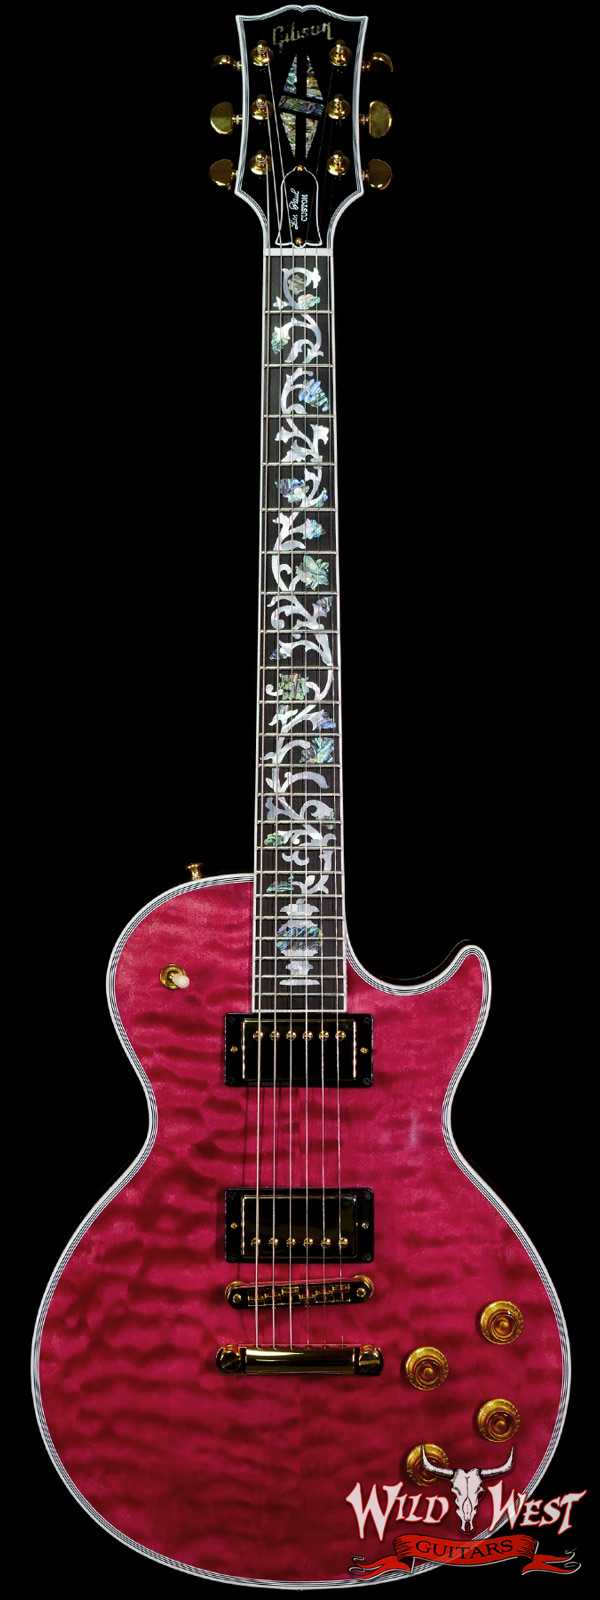 Gibson Custom Shop M2M Hand Selected 5A Quilt Maple Top Les Paul Custom Ebony Board with Tree of Life Inlay Chablis Pink (Blemish)